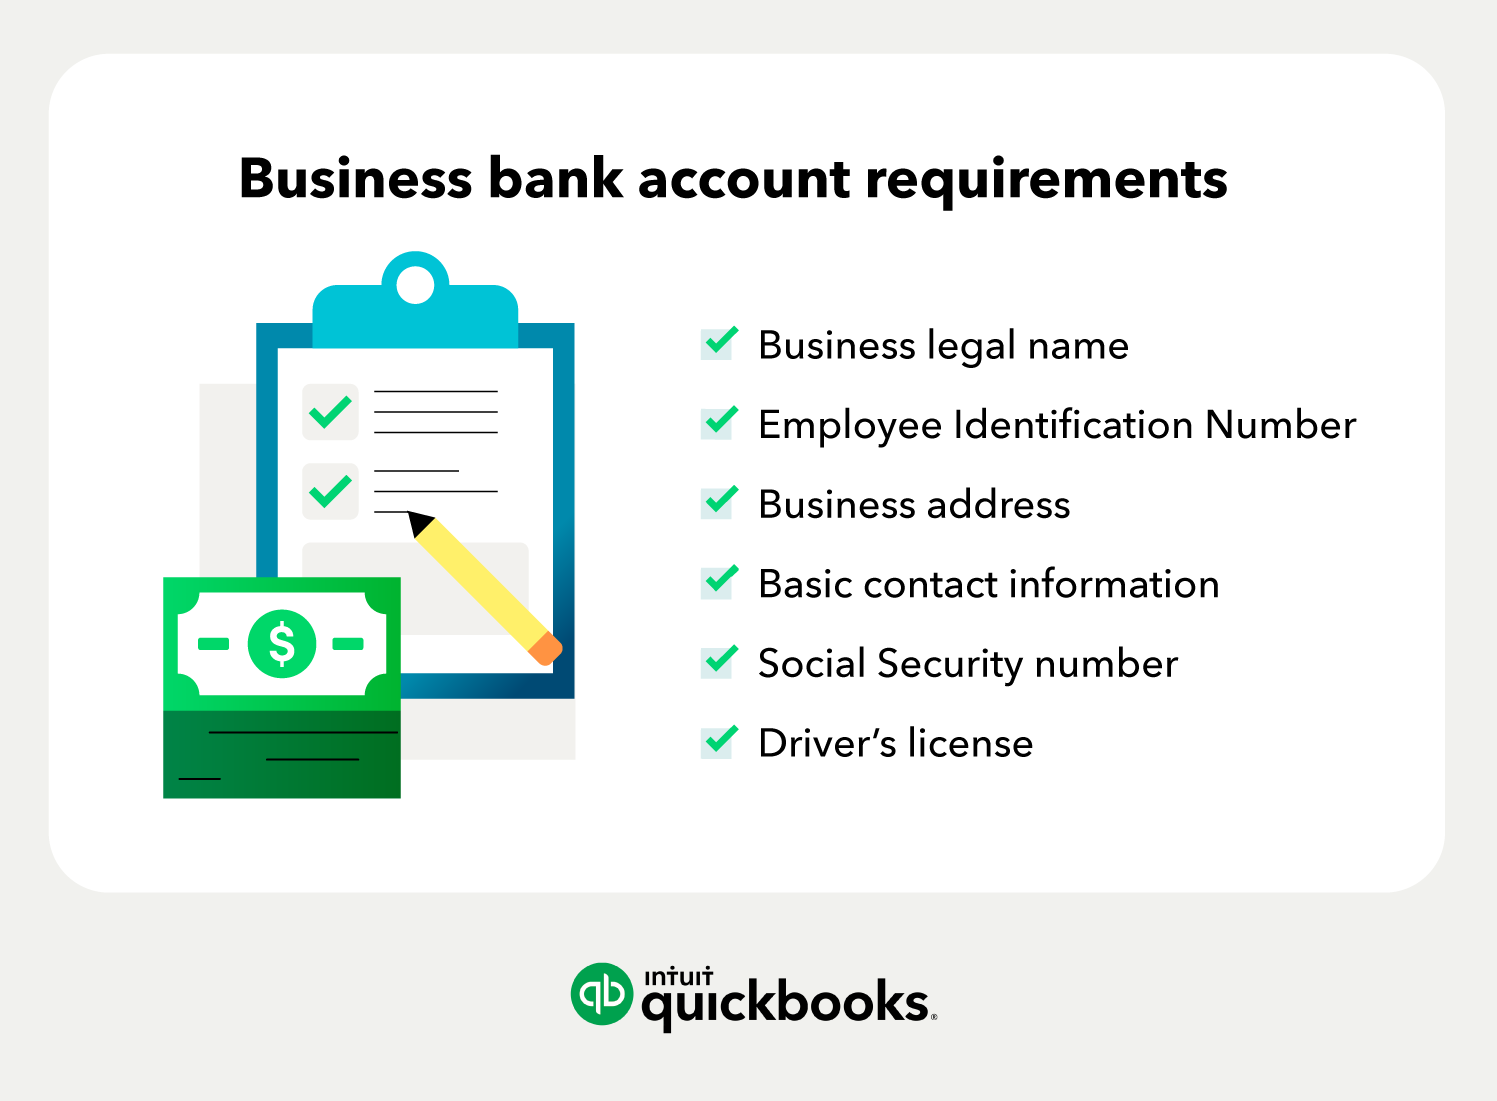 Business bank account requirements